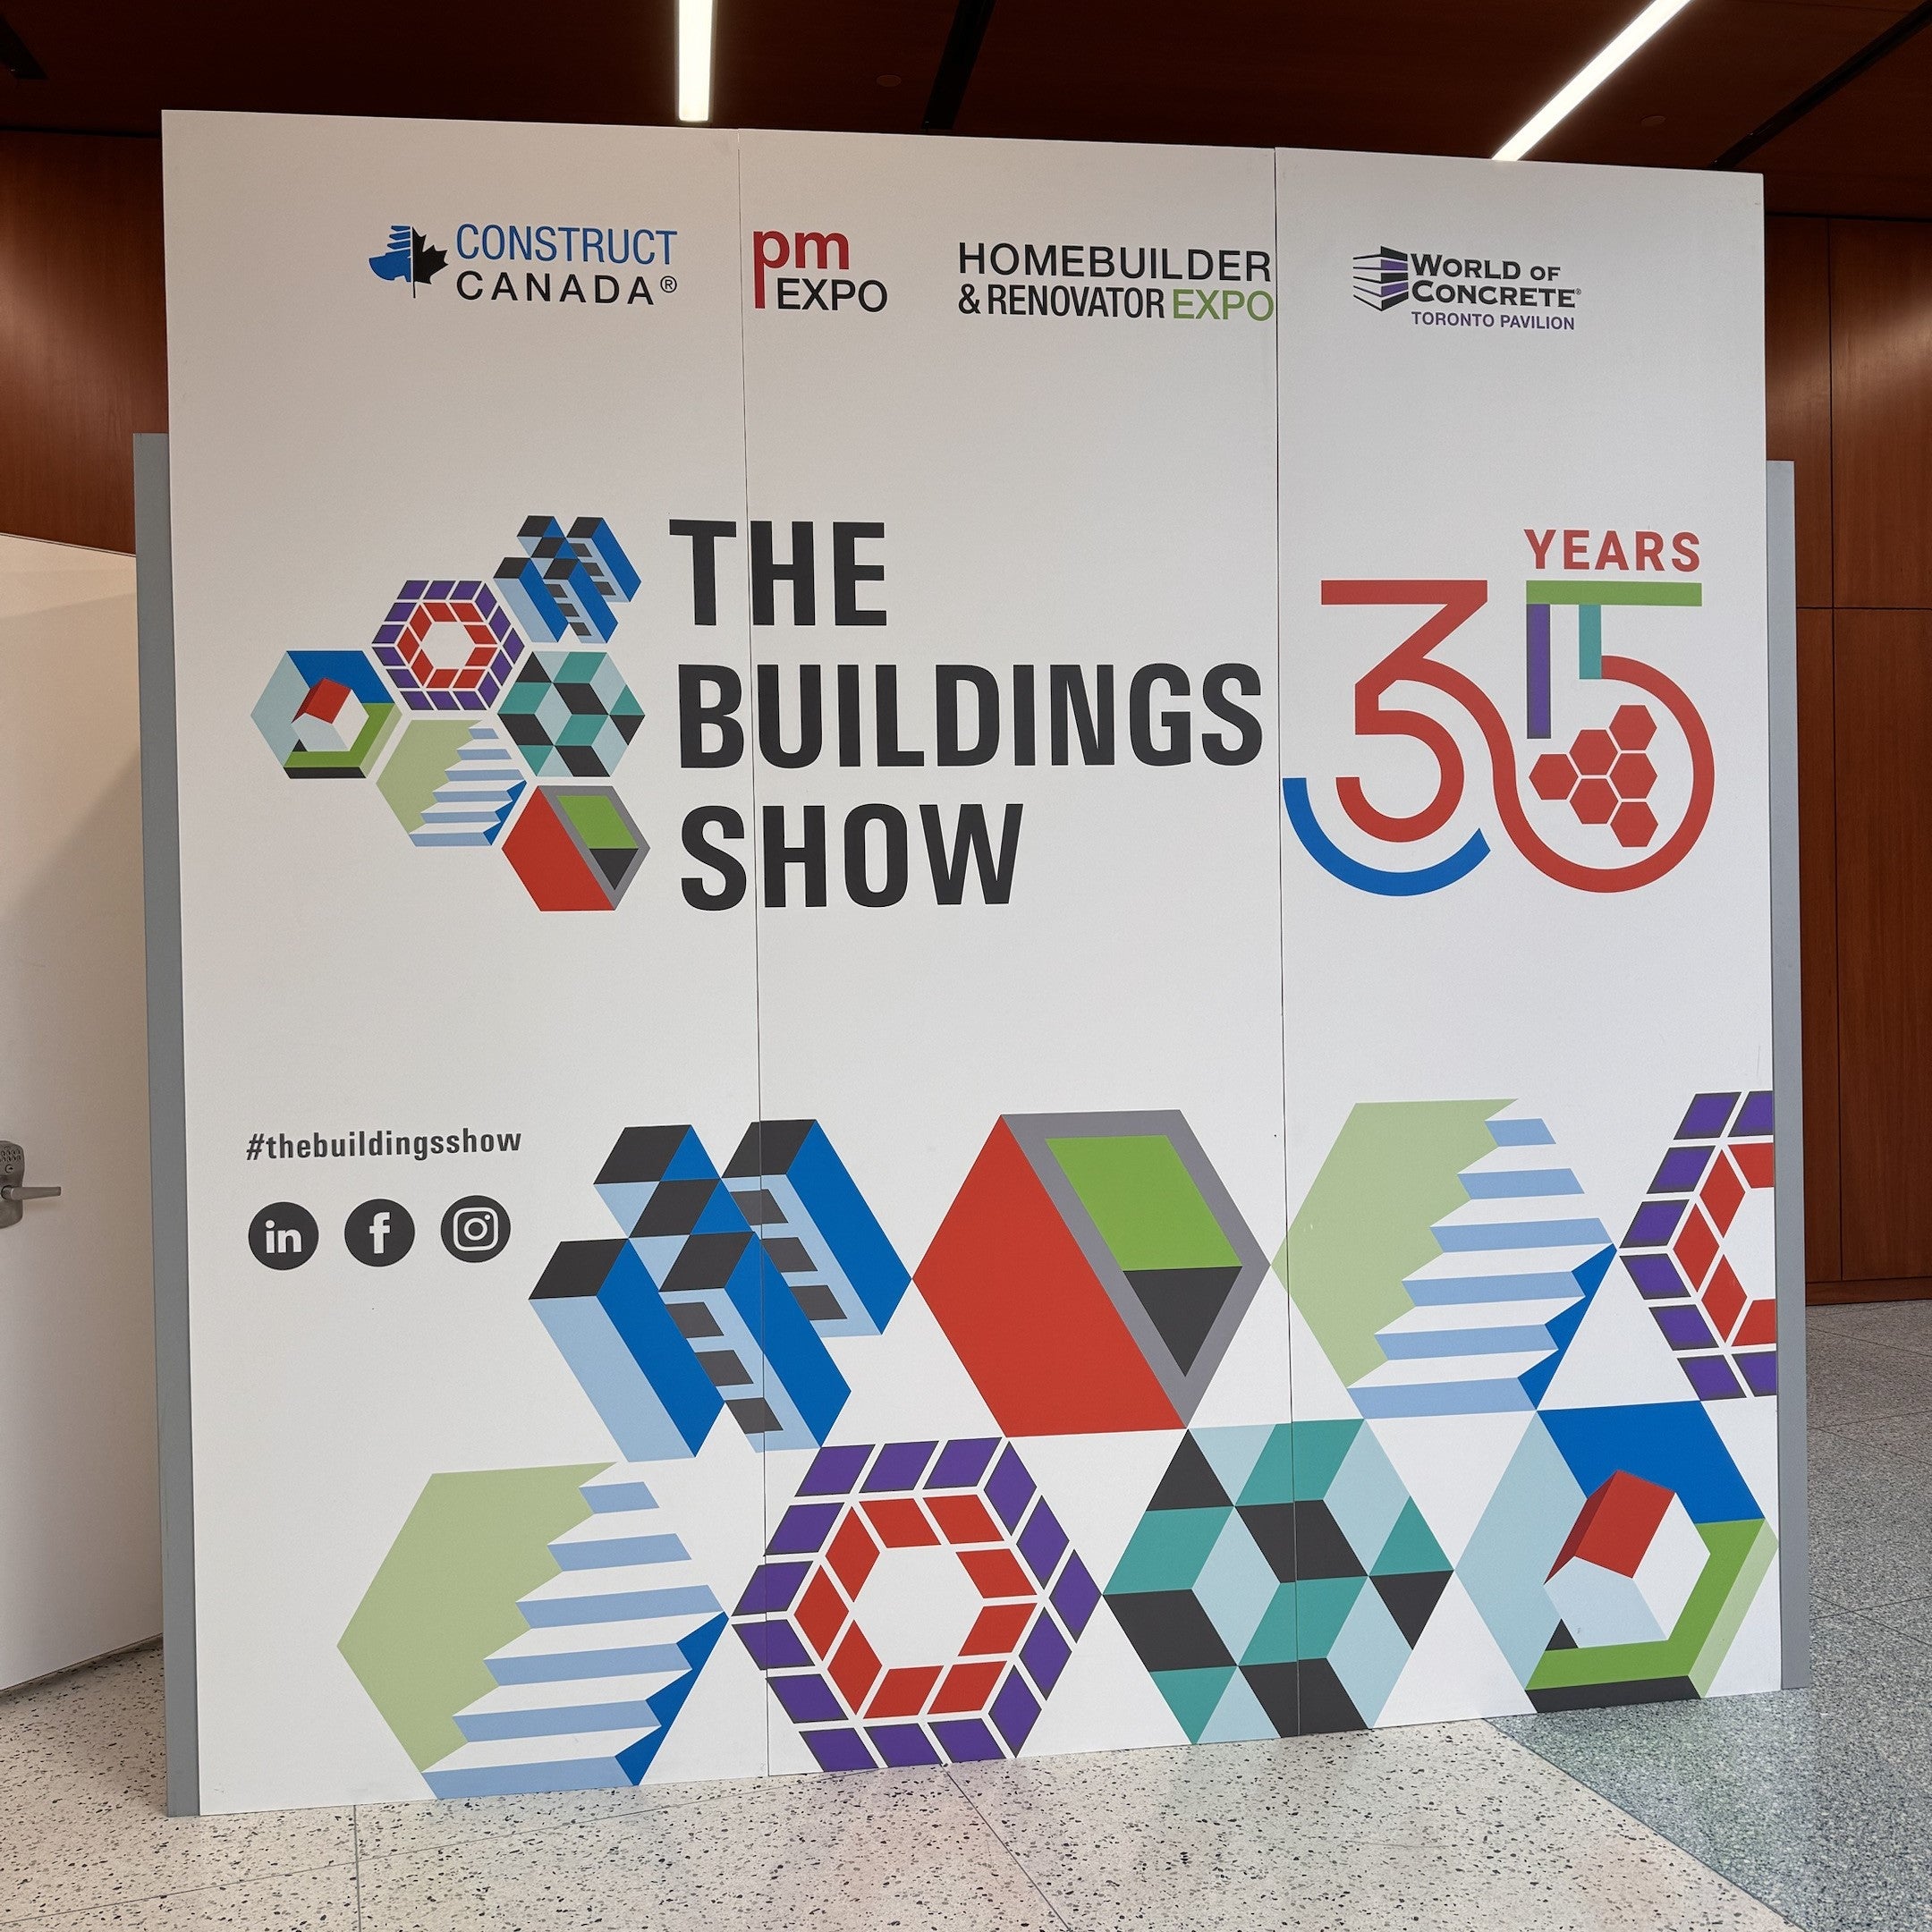 From Showcase to Collaboration: Our Triumphs at The Buildings Show